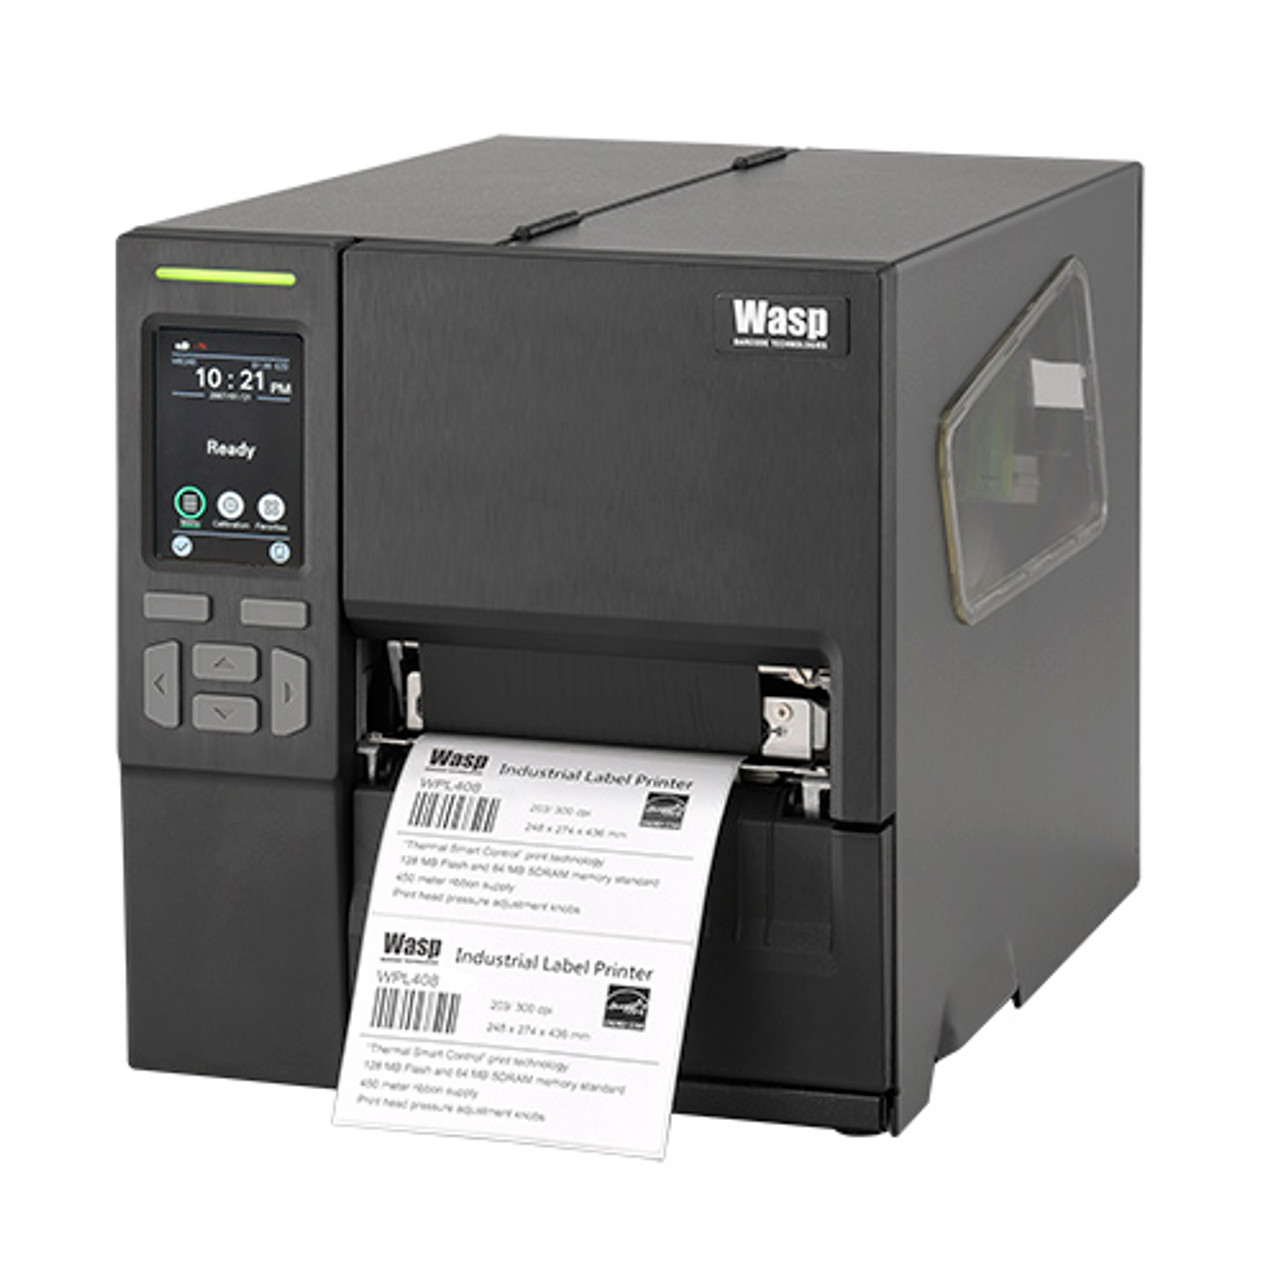 Wasp WPL305 Monochrome Direct Thermal Label Printer with Reflective Media Sensor, in s Print Speed, 203 dpi Print Resolution, 4.25 Print Width, 110  - 4